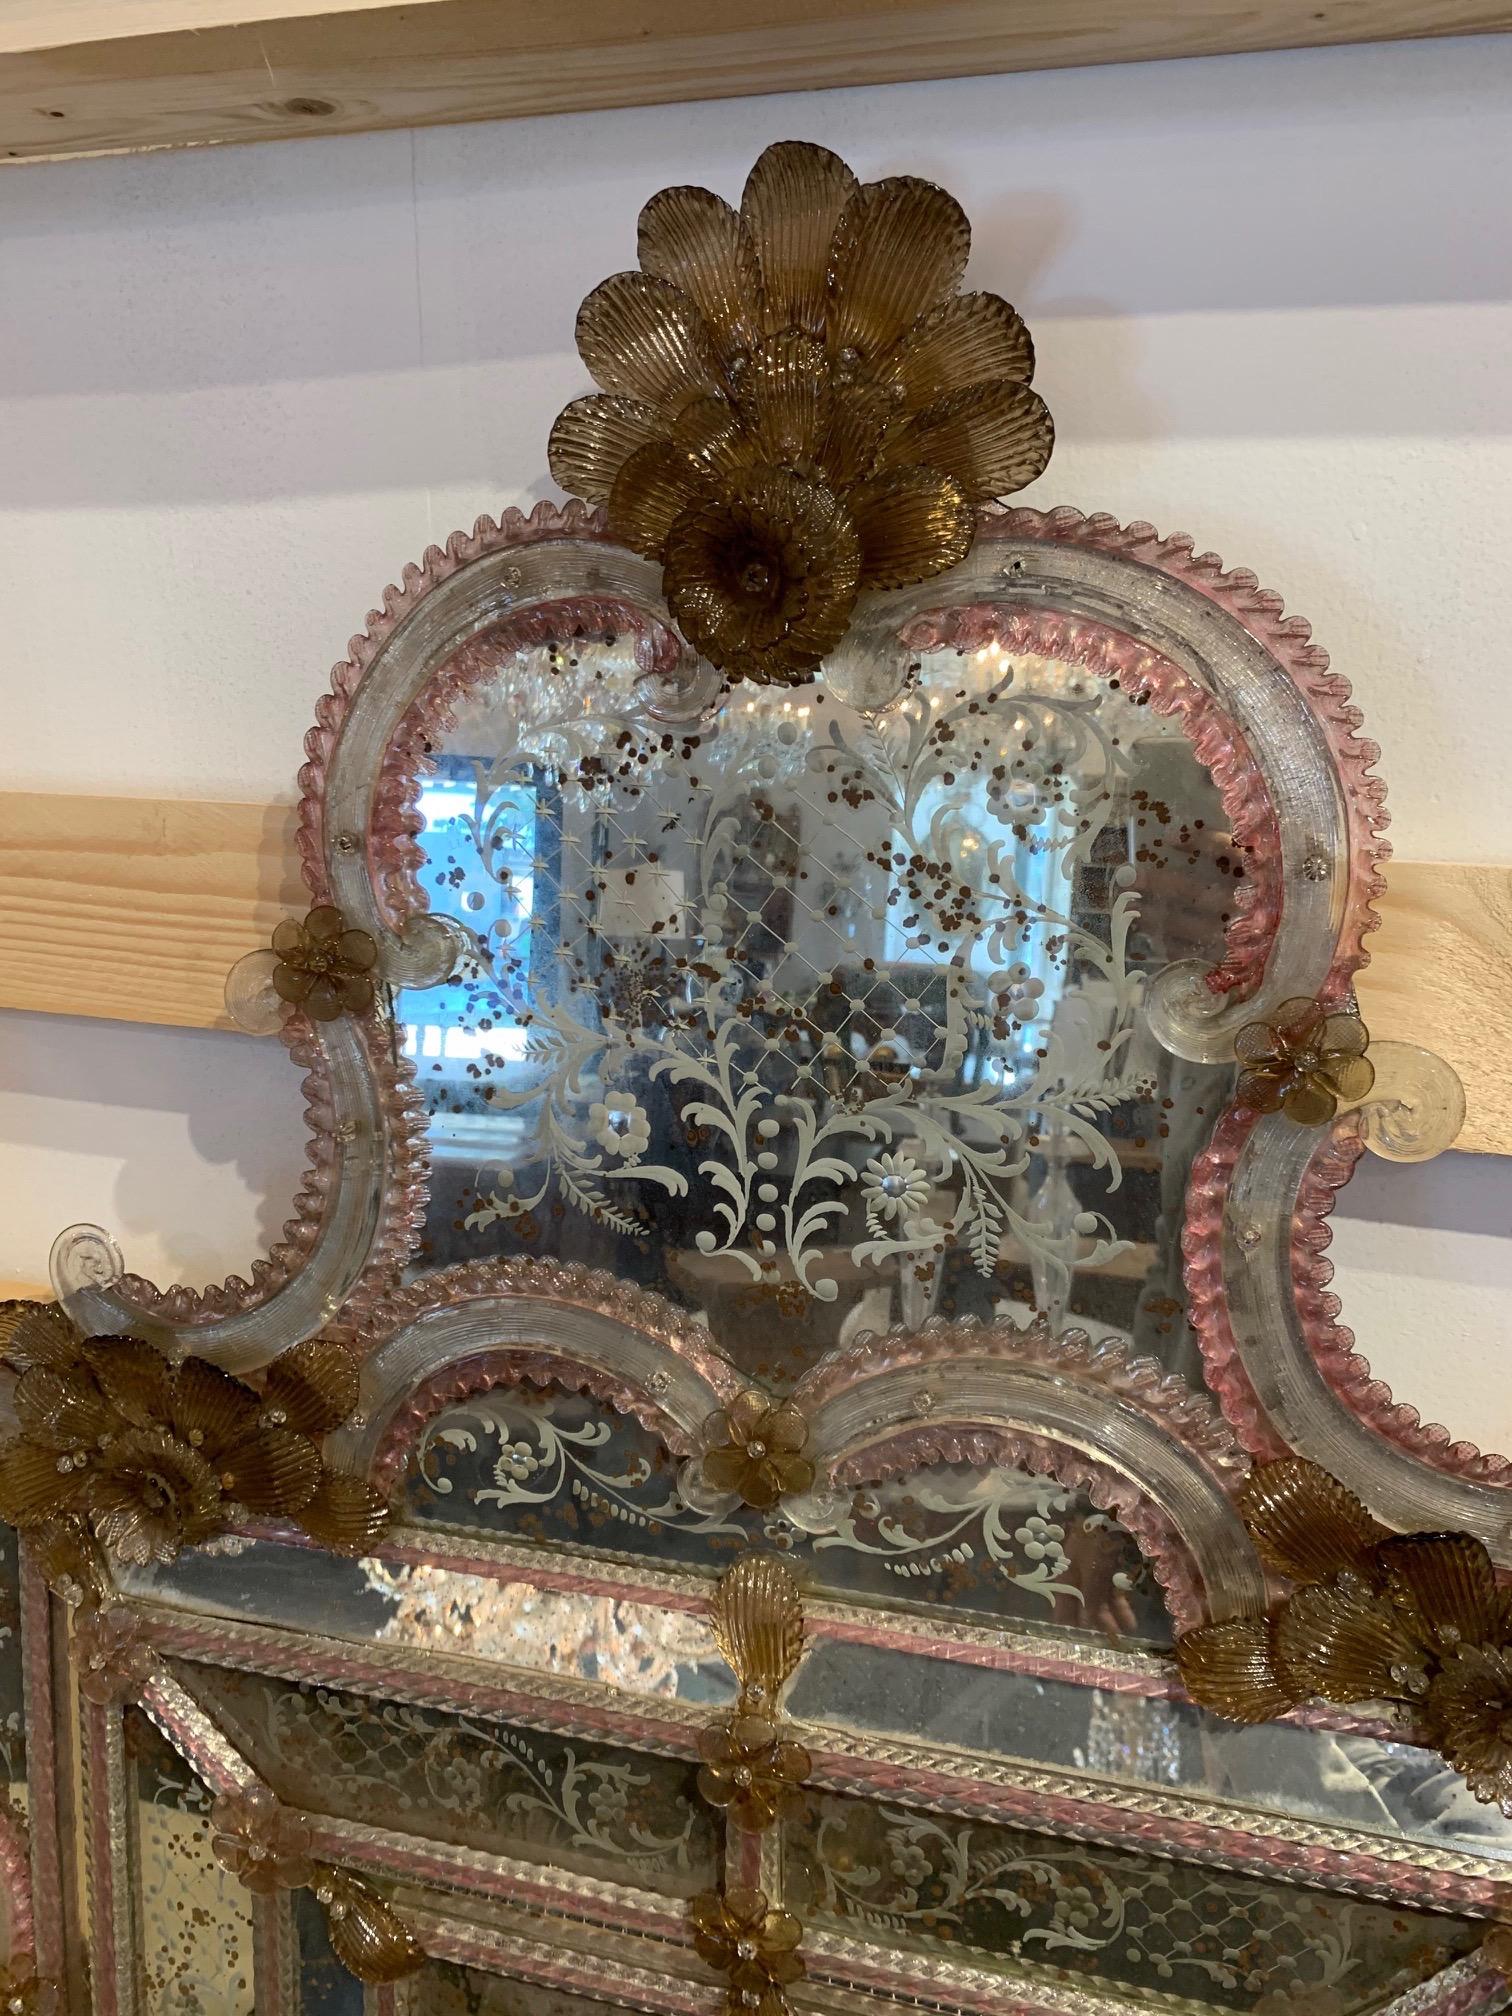 Outstanding 19th century Venetian etched glass mirror. Featuring gold and pale pink Venetian glass and a beautiful etched mirror featuring a floral pattern. The mirror is all original and complete. A real work of art!!